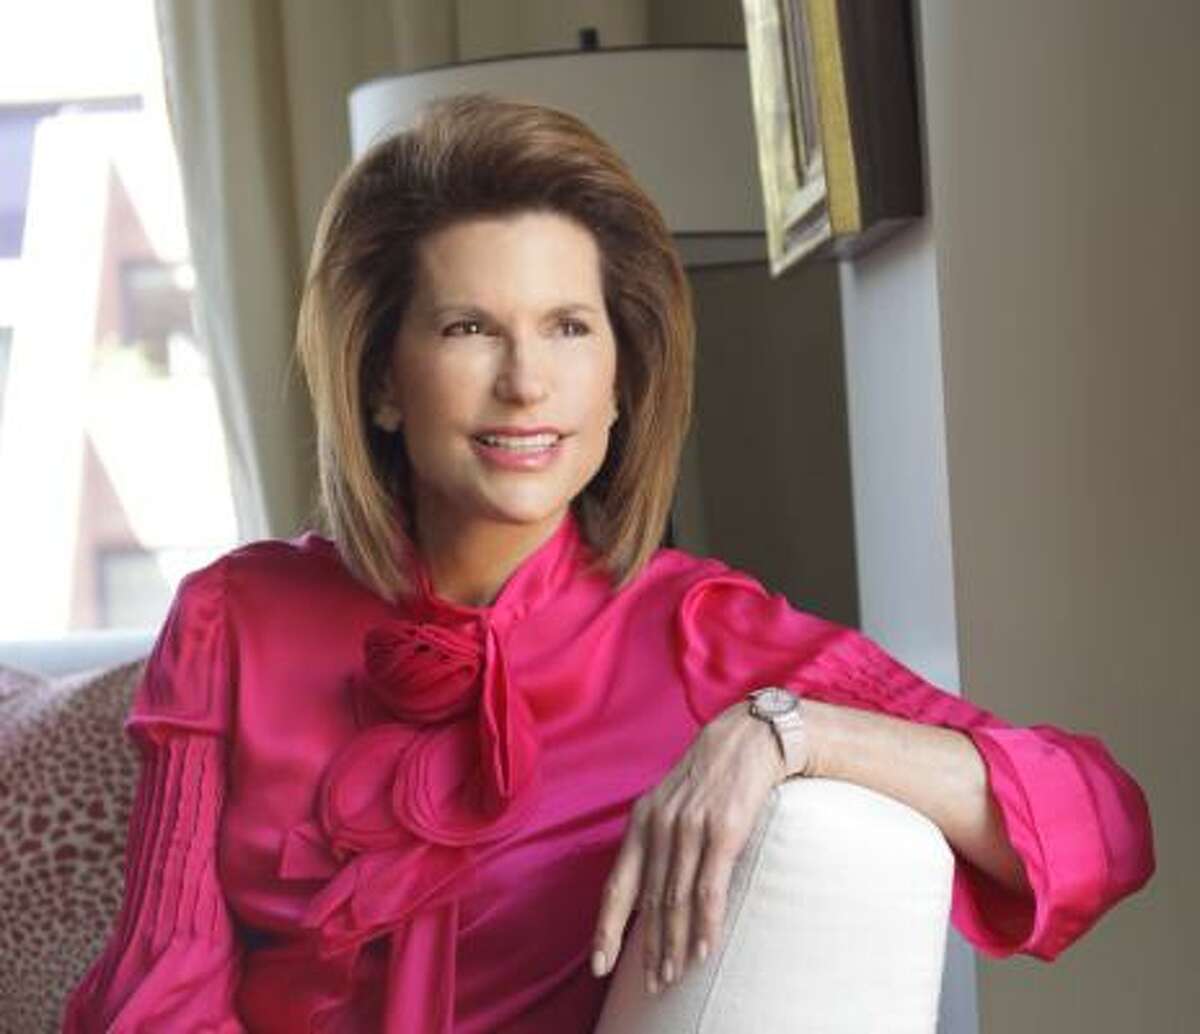 In honor of her sister, Nancy Brinker founded Susan G. Komen for the Cure to fund research and awareness campaigns.